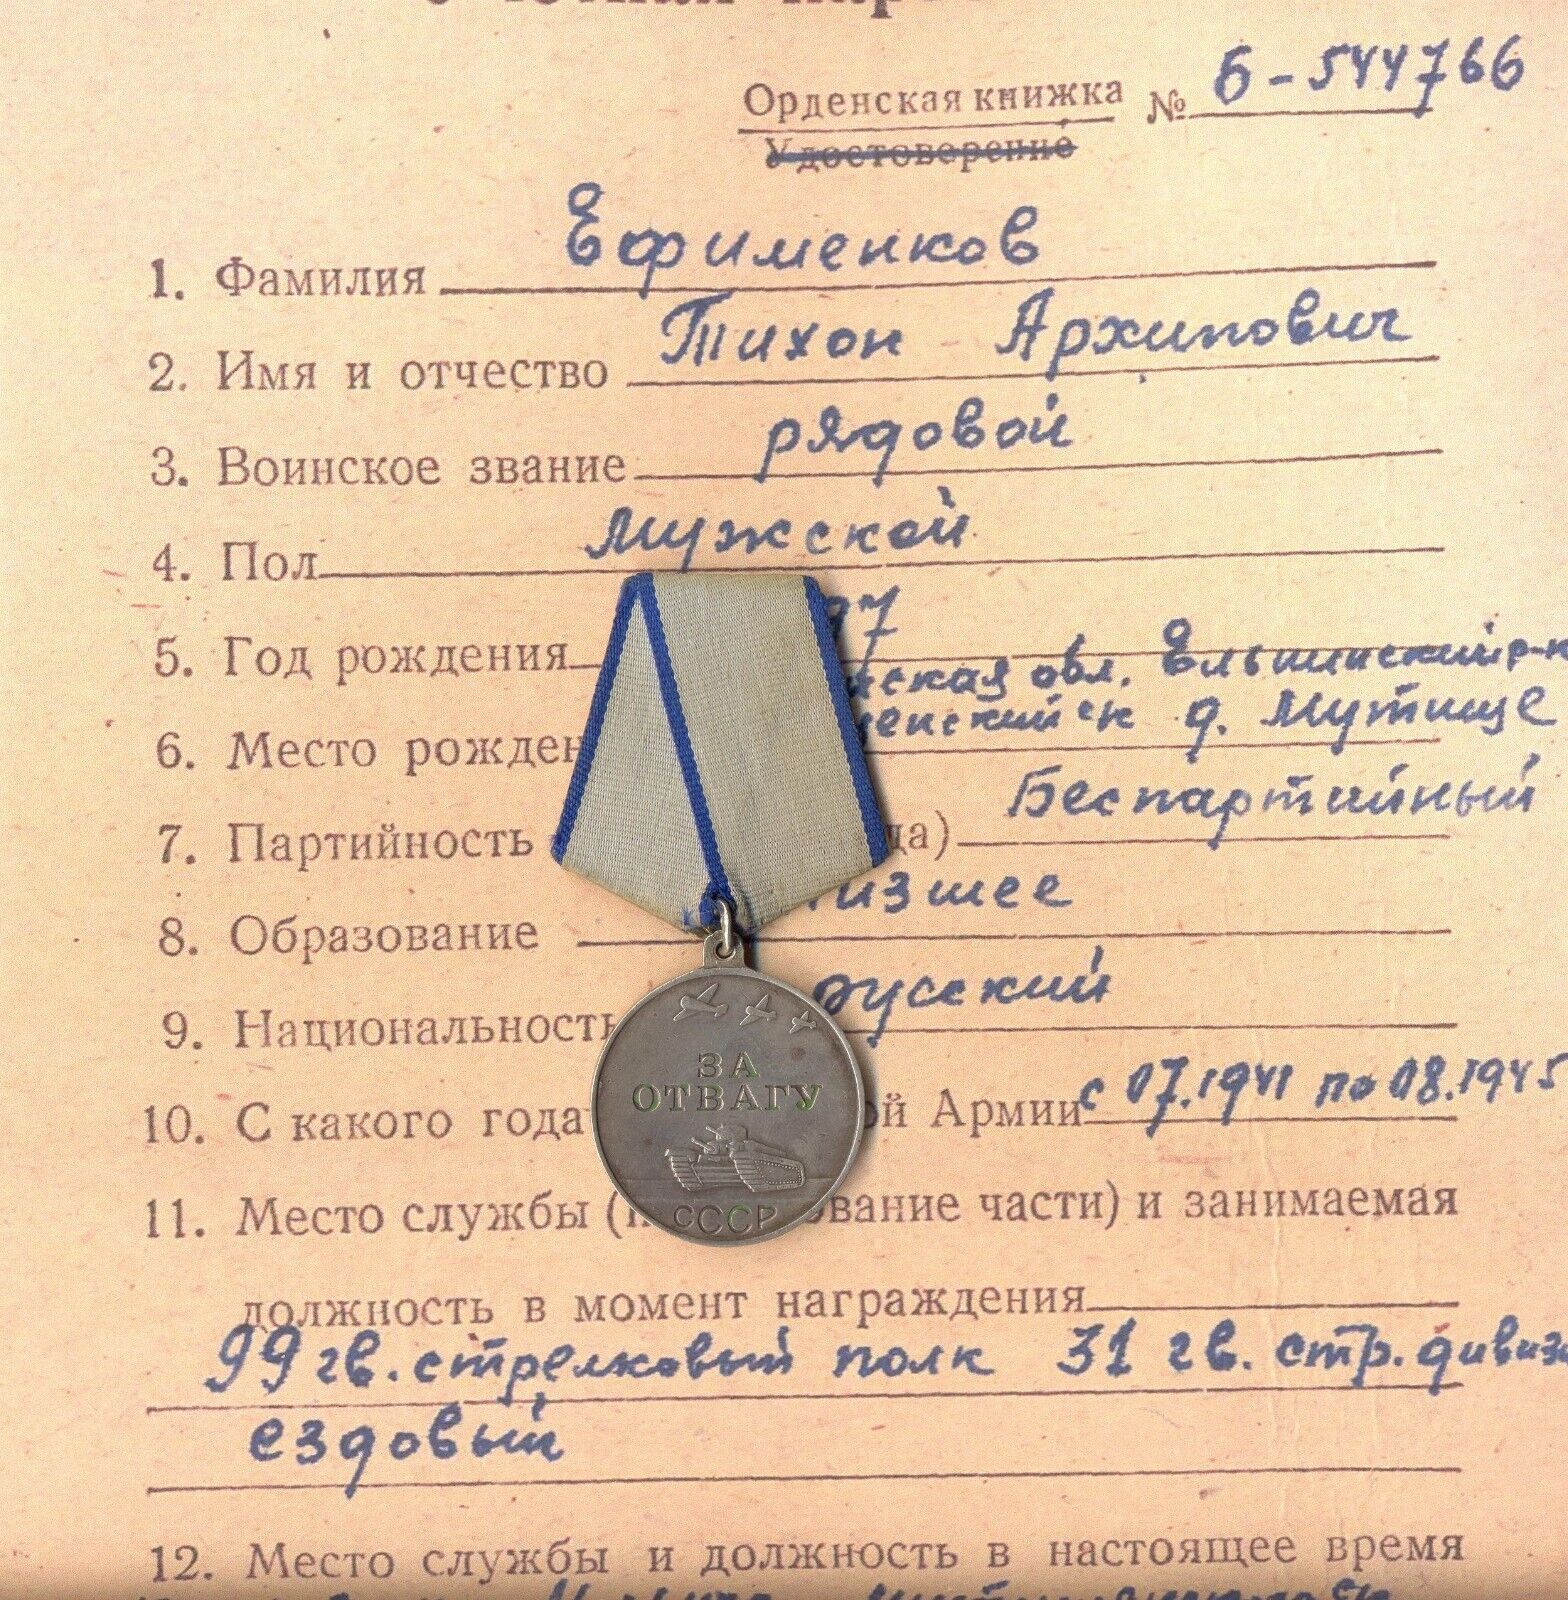 Soviet star order red Medal Courage Bravery with research Combat (1802в)